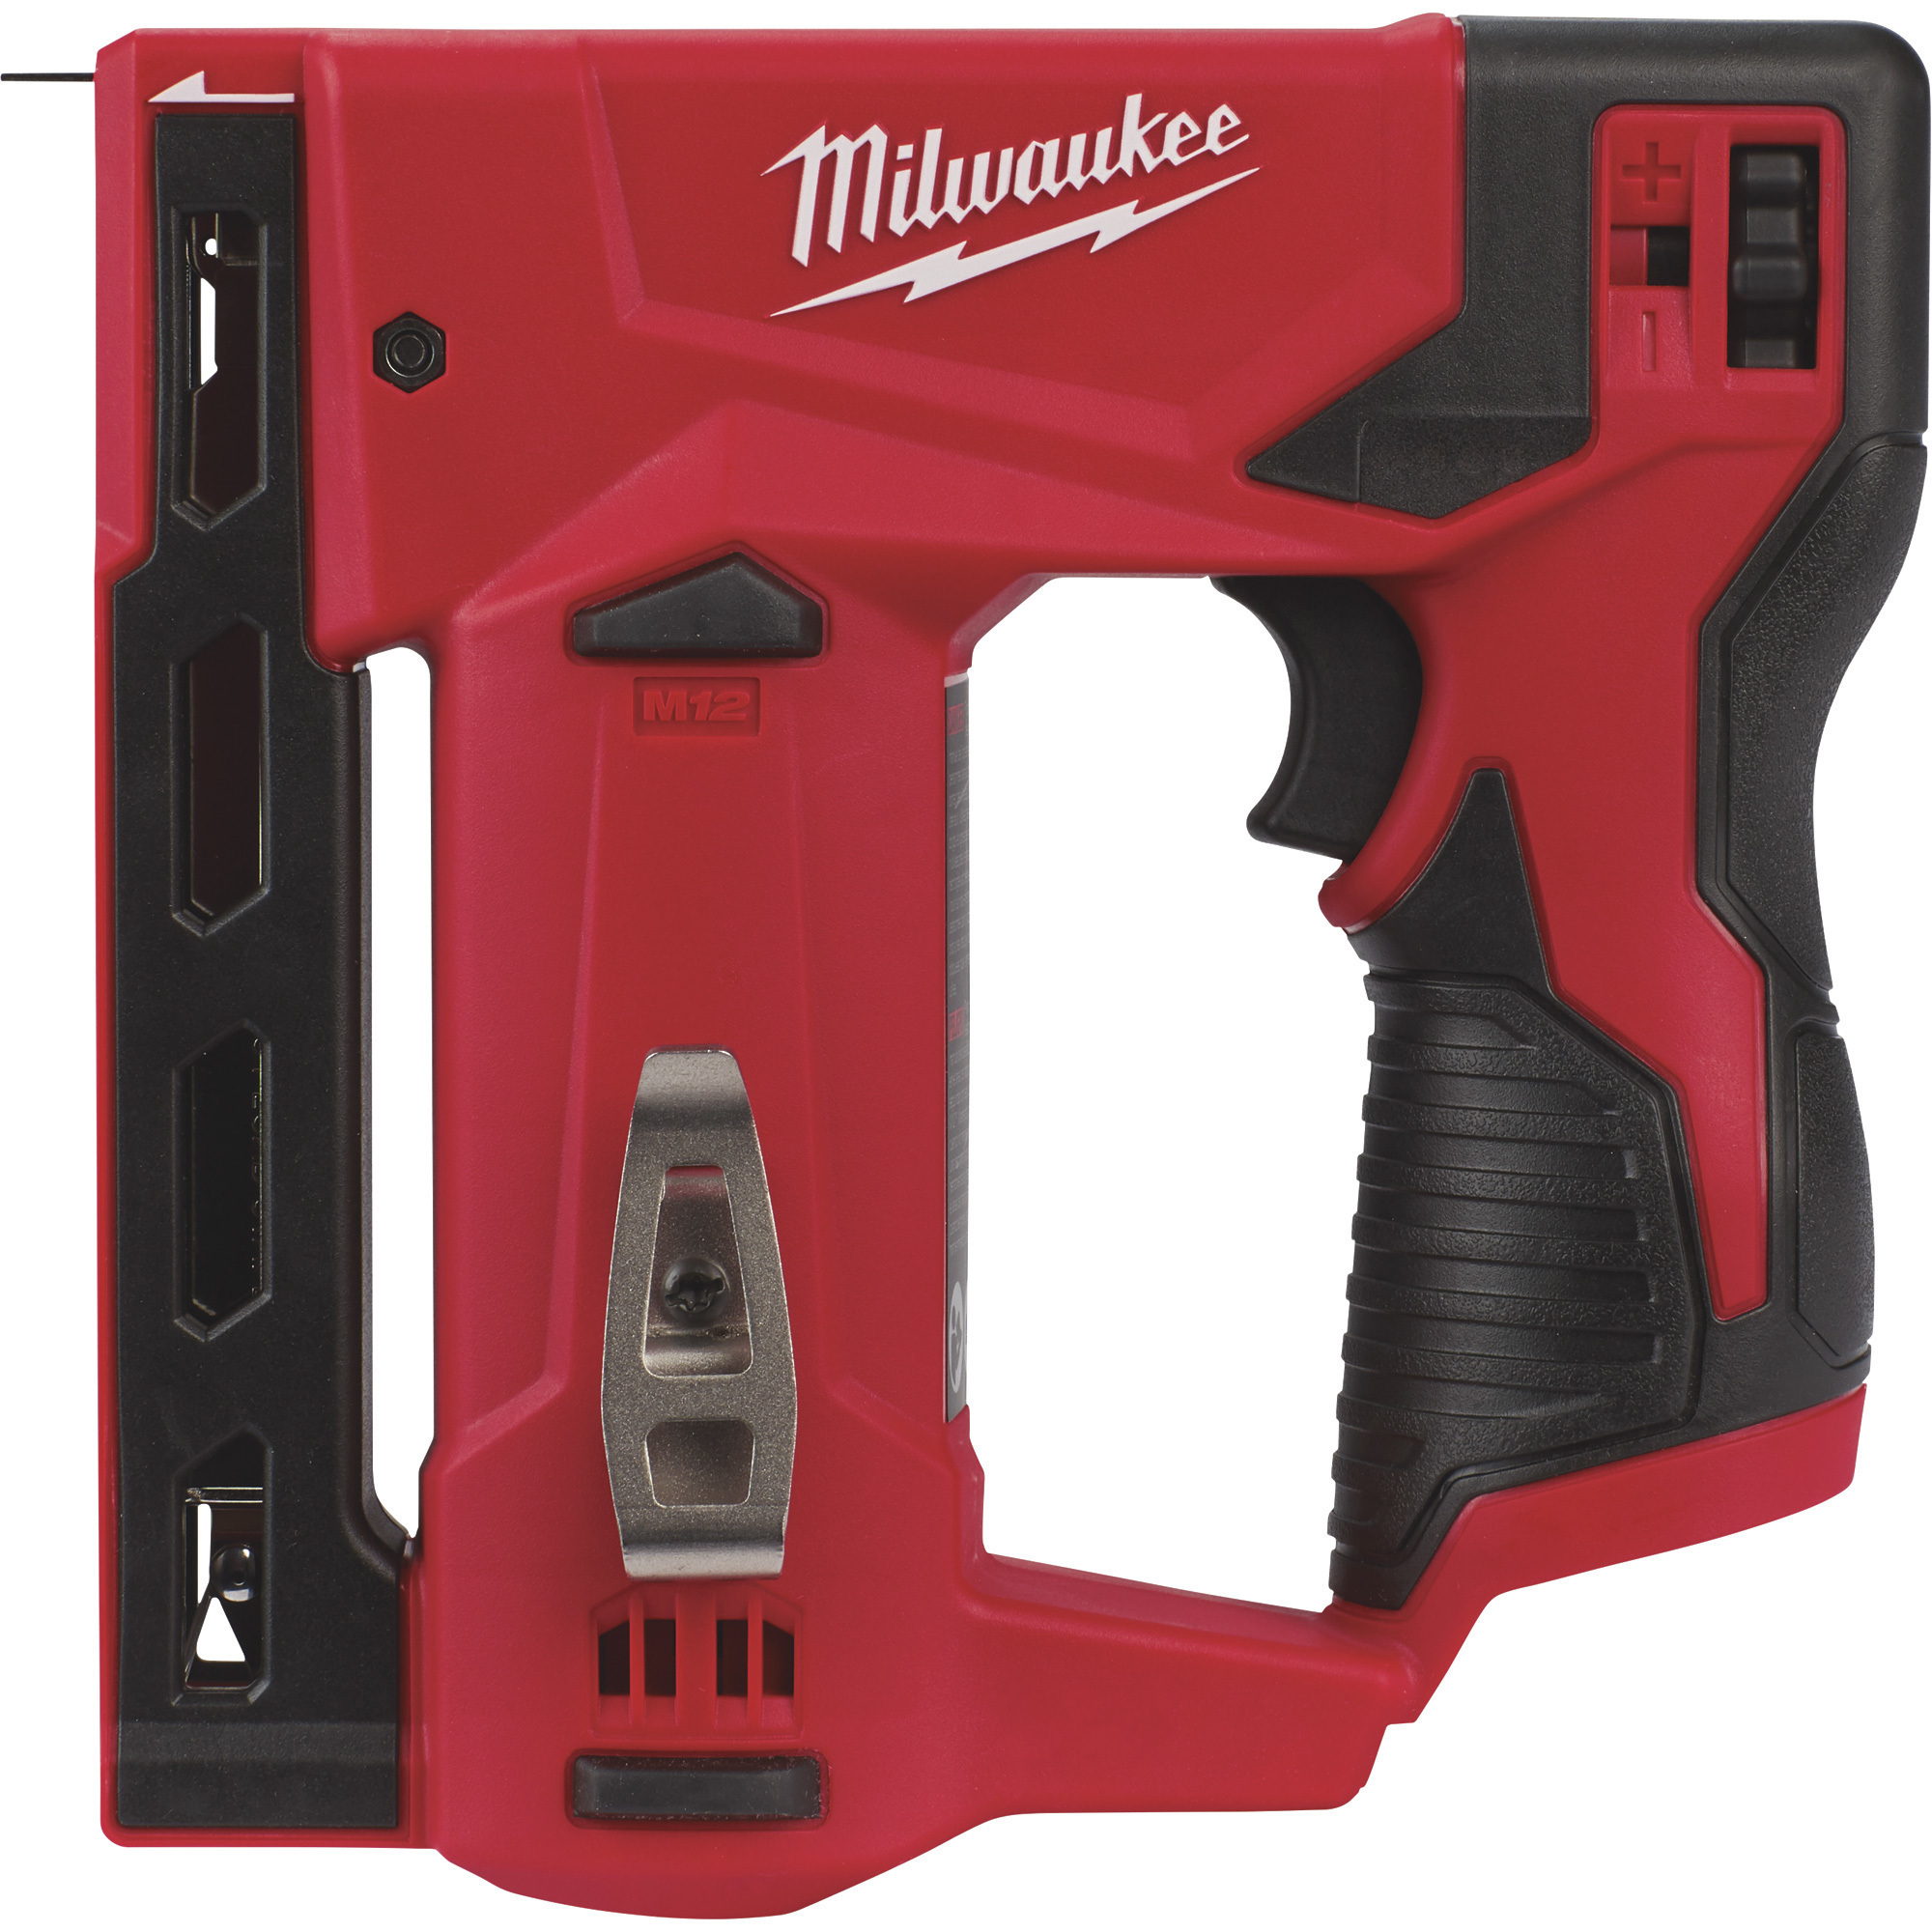 Milwaukee M12 Cordless 3/8Inch Crown Stapler, Tool Only, Model 2447-20